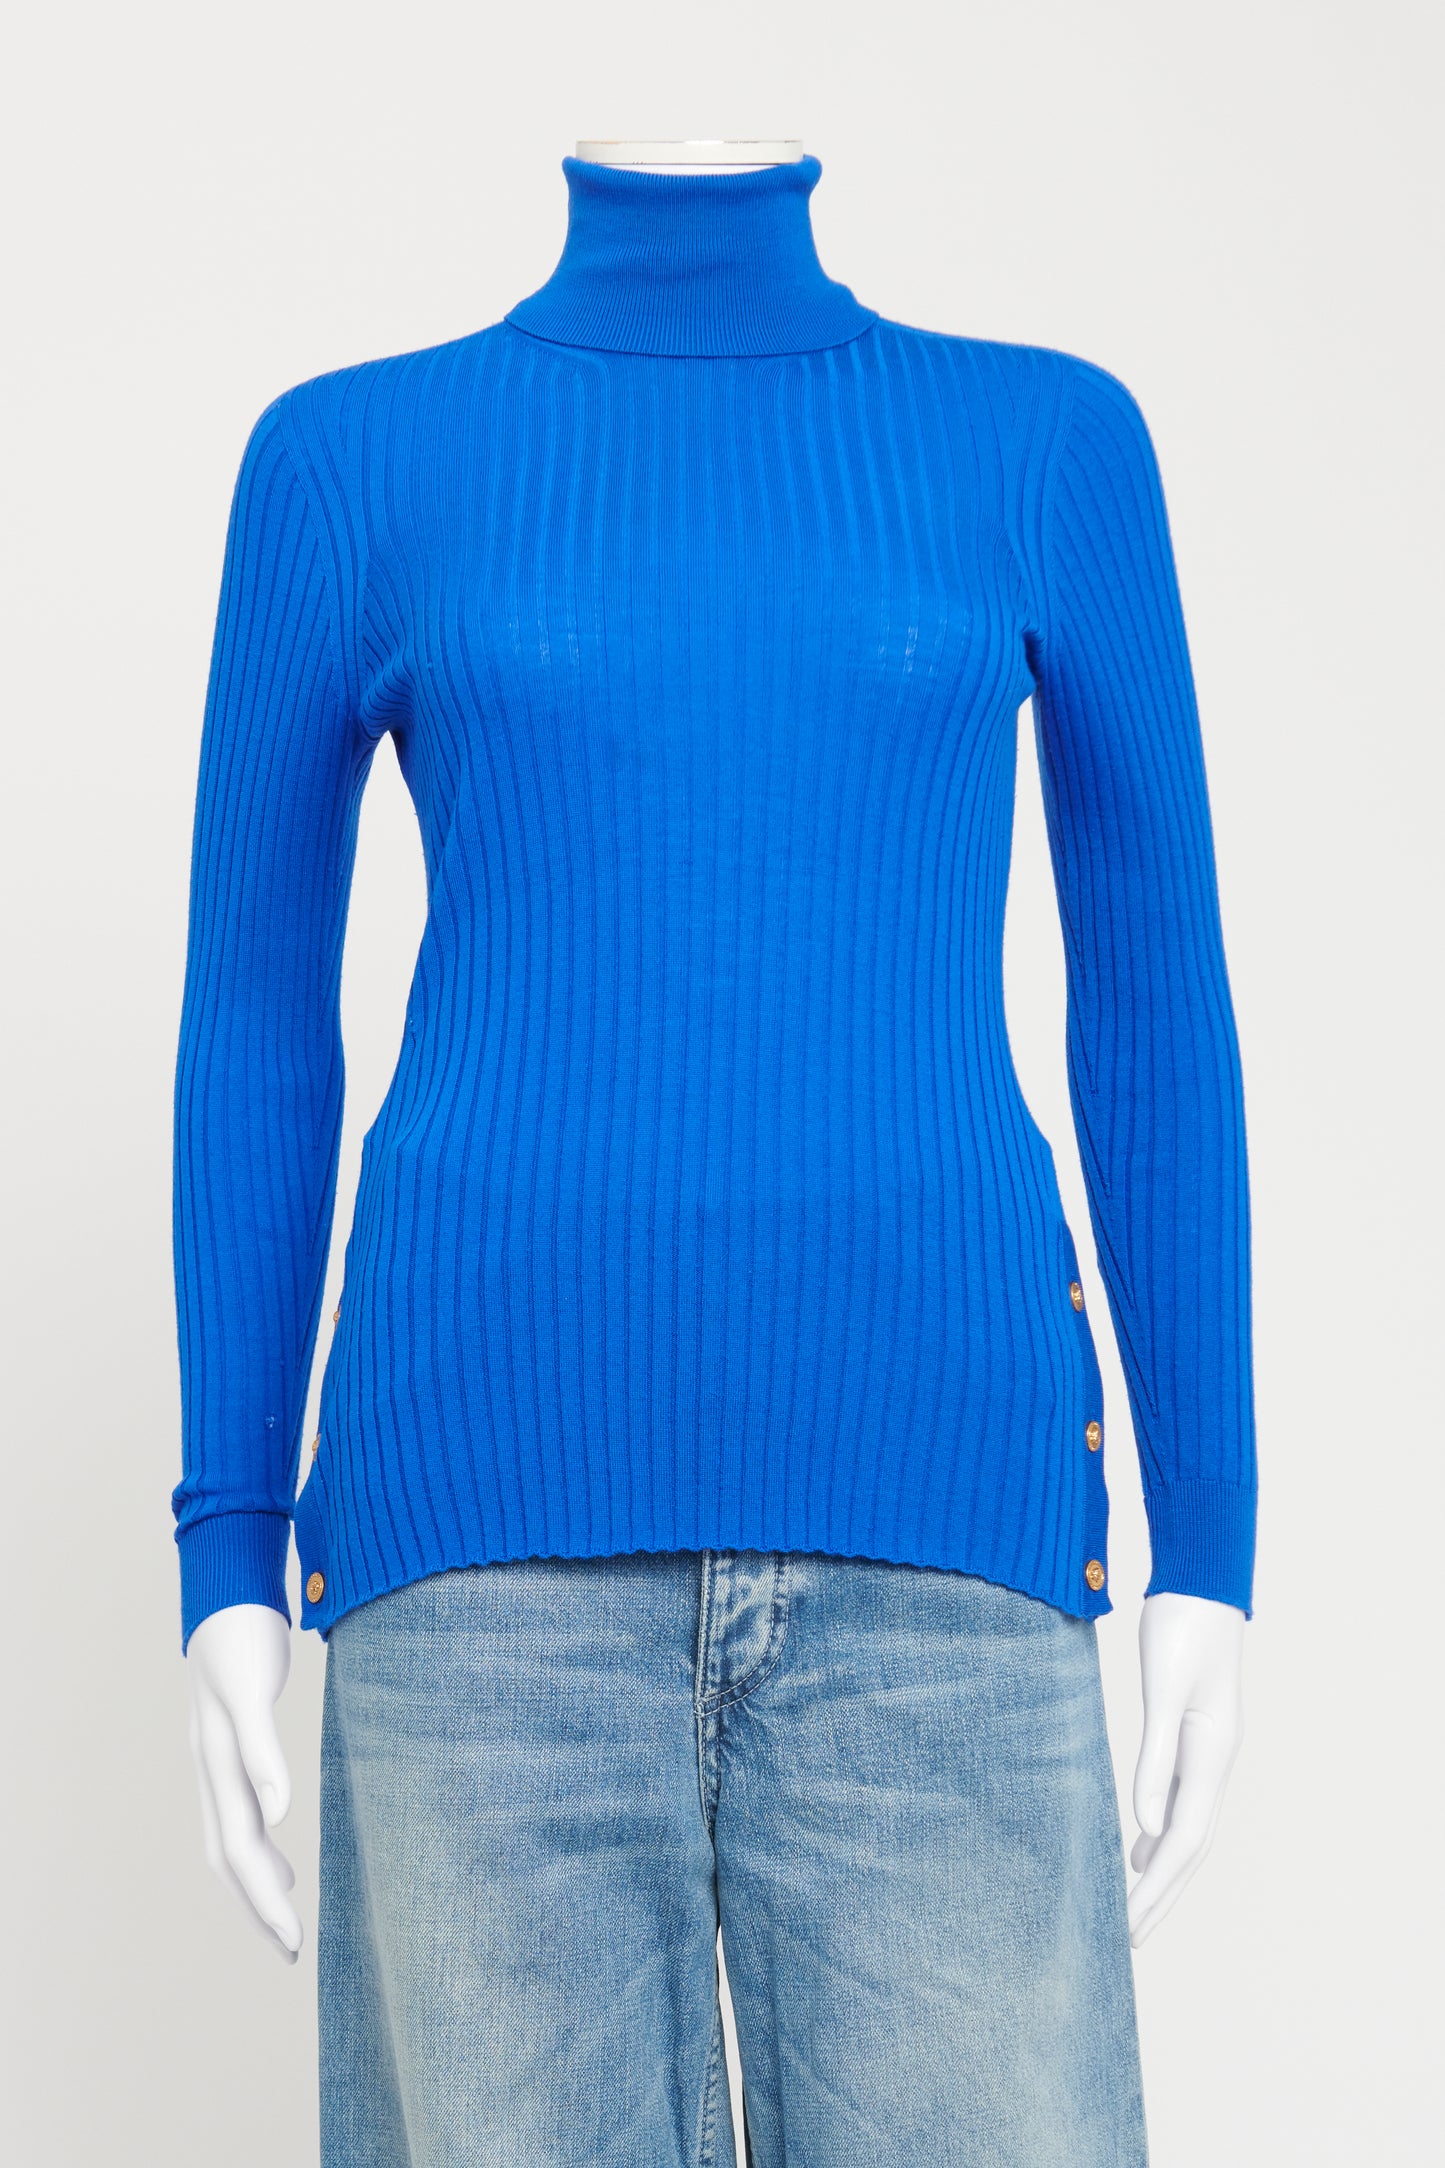 Cobalt Blue Wool Ribbed Turtleneck Preowned Sweater